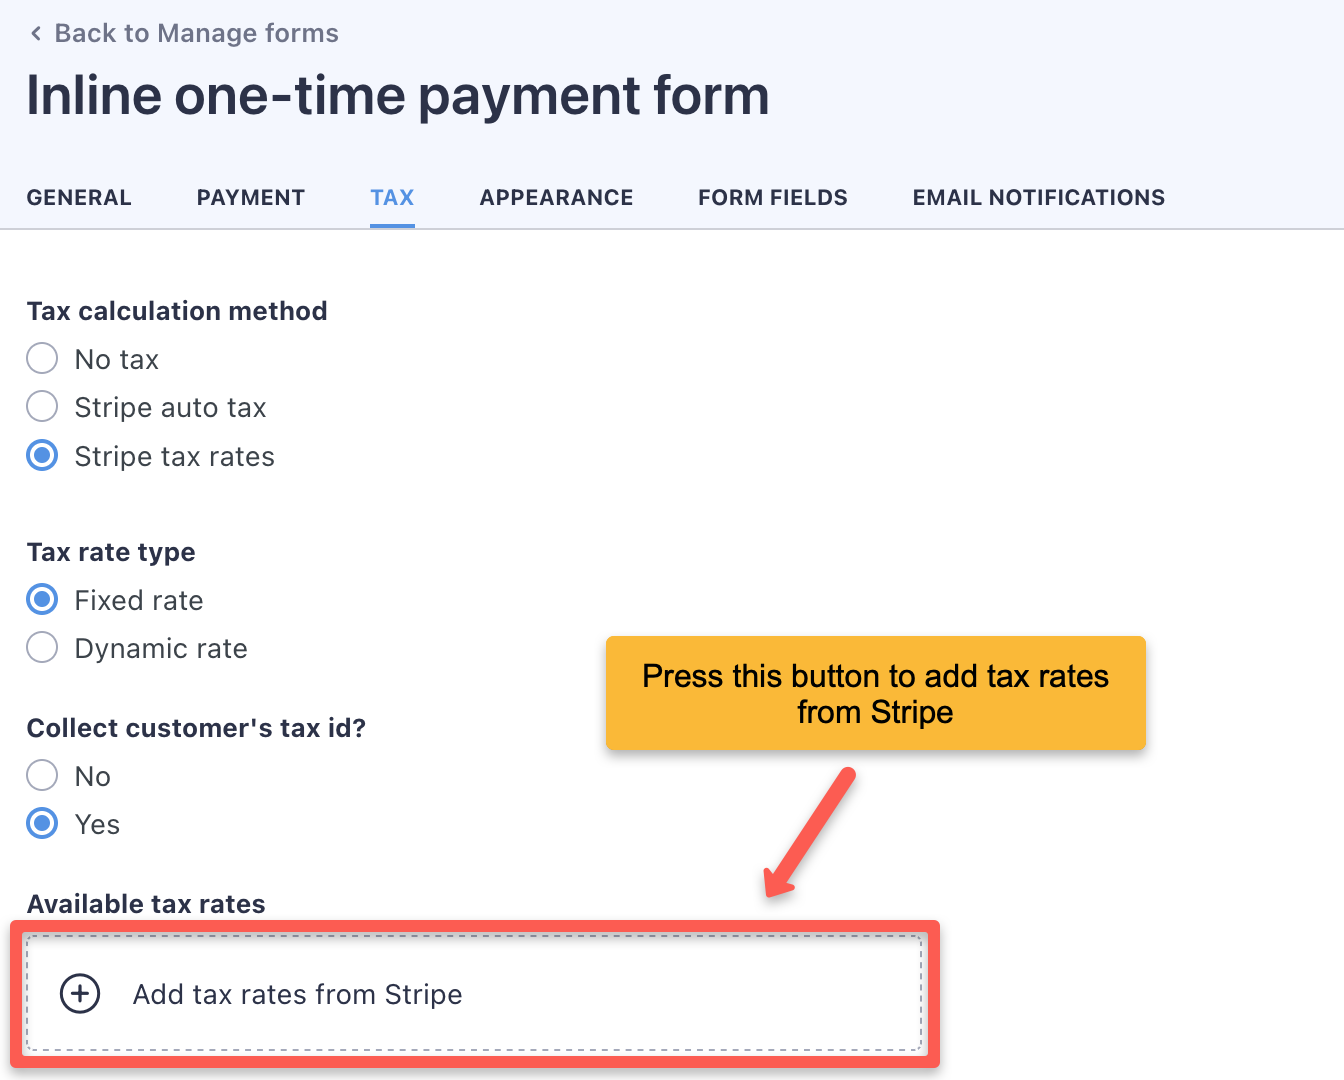 Add tax rates on the 'Tax' tab of the form